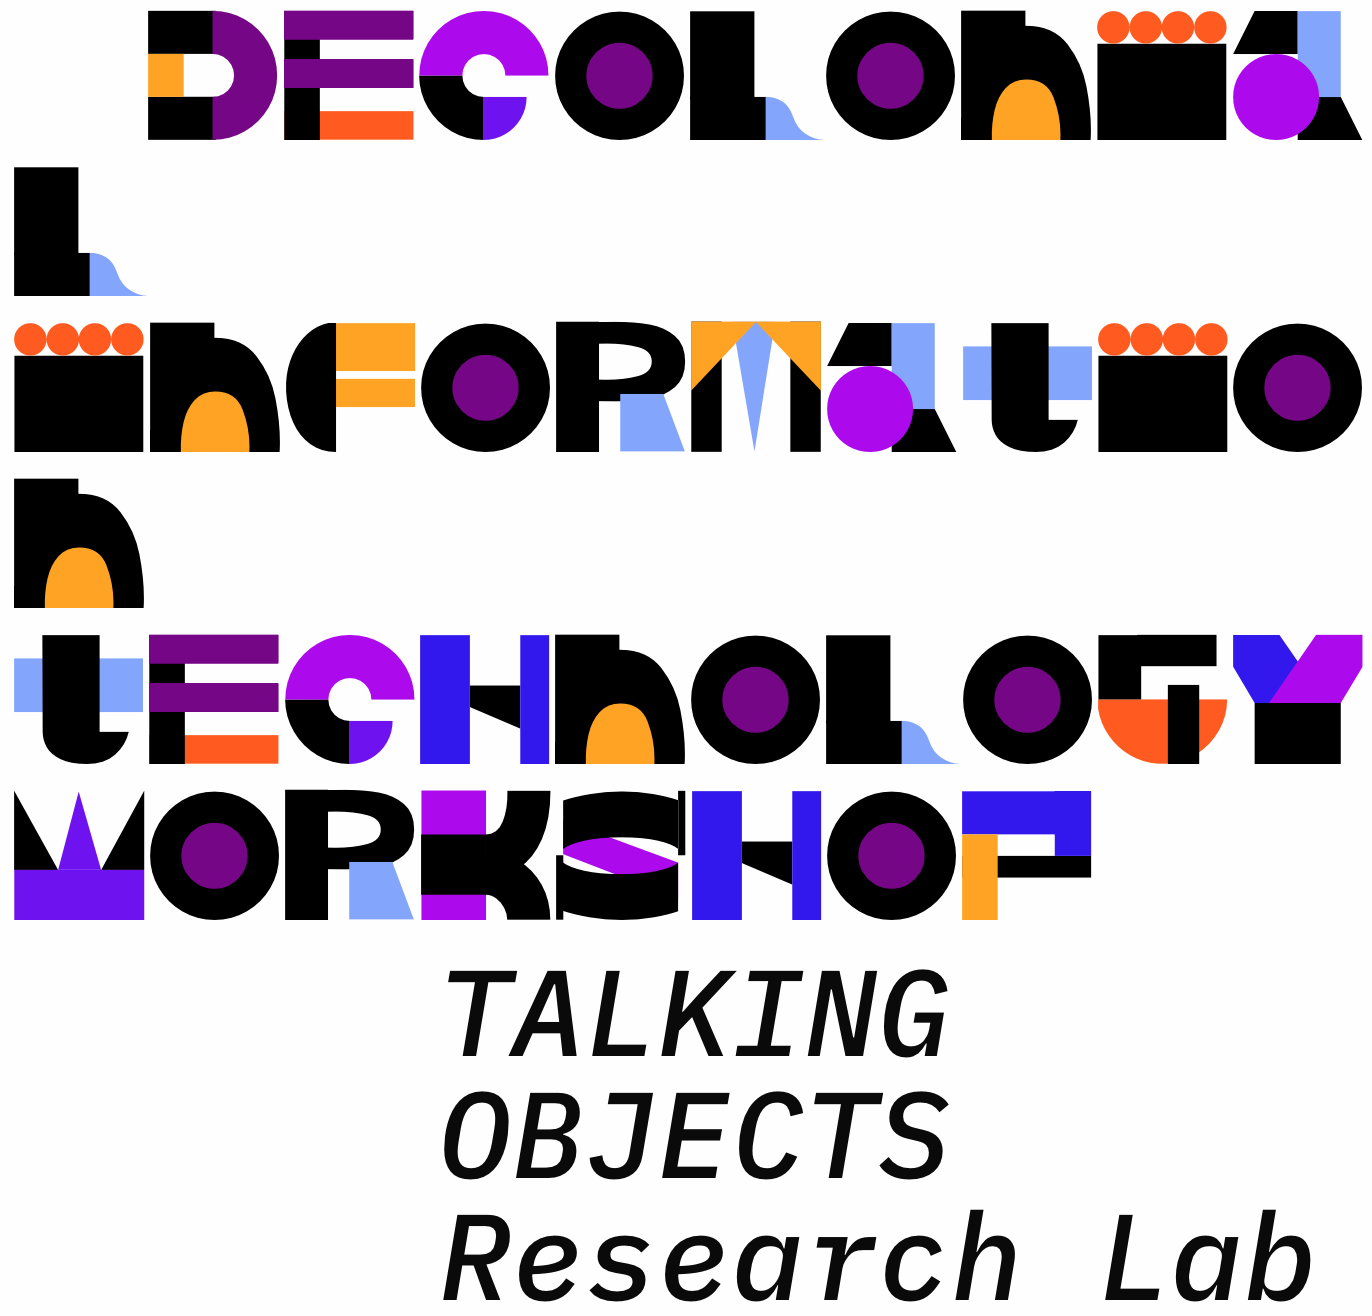 Decolonial information technology workshop. TALKING OBJECTS Research LAB